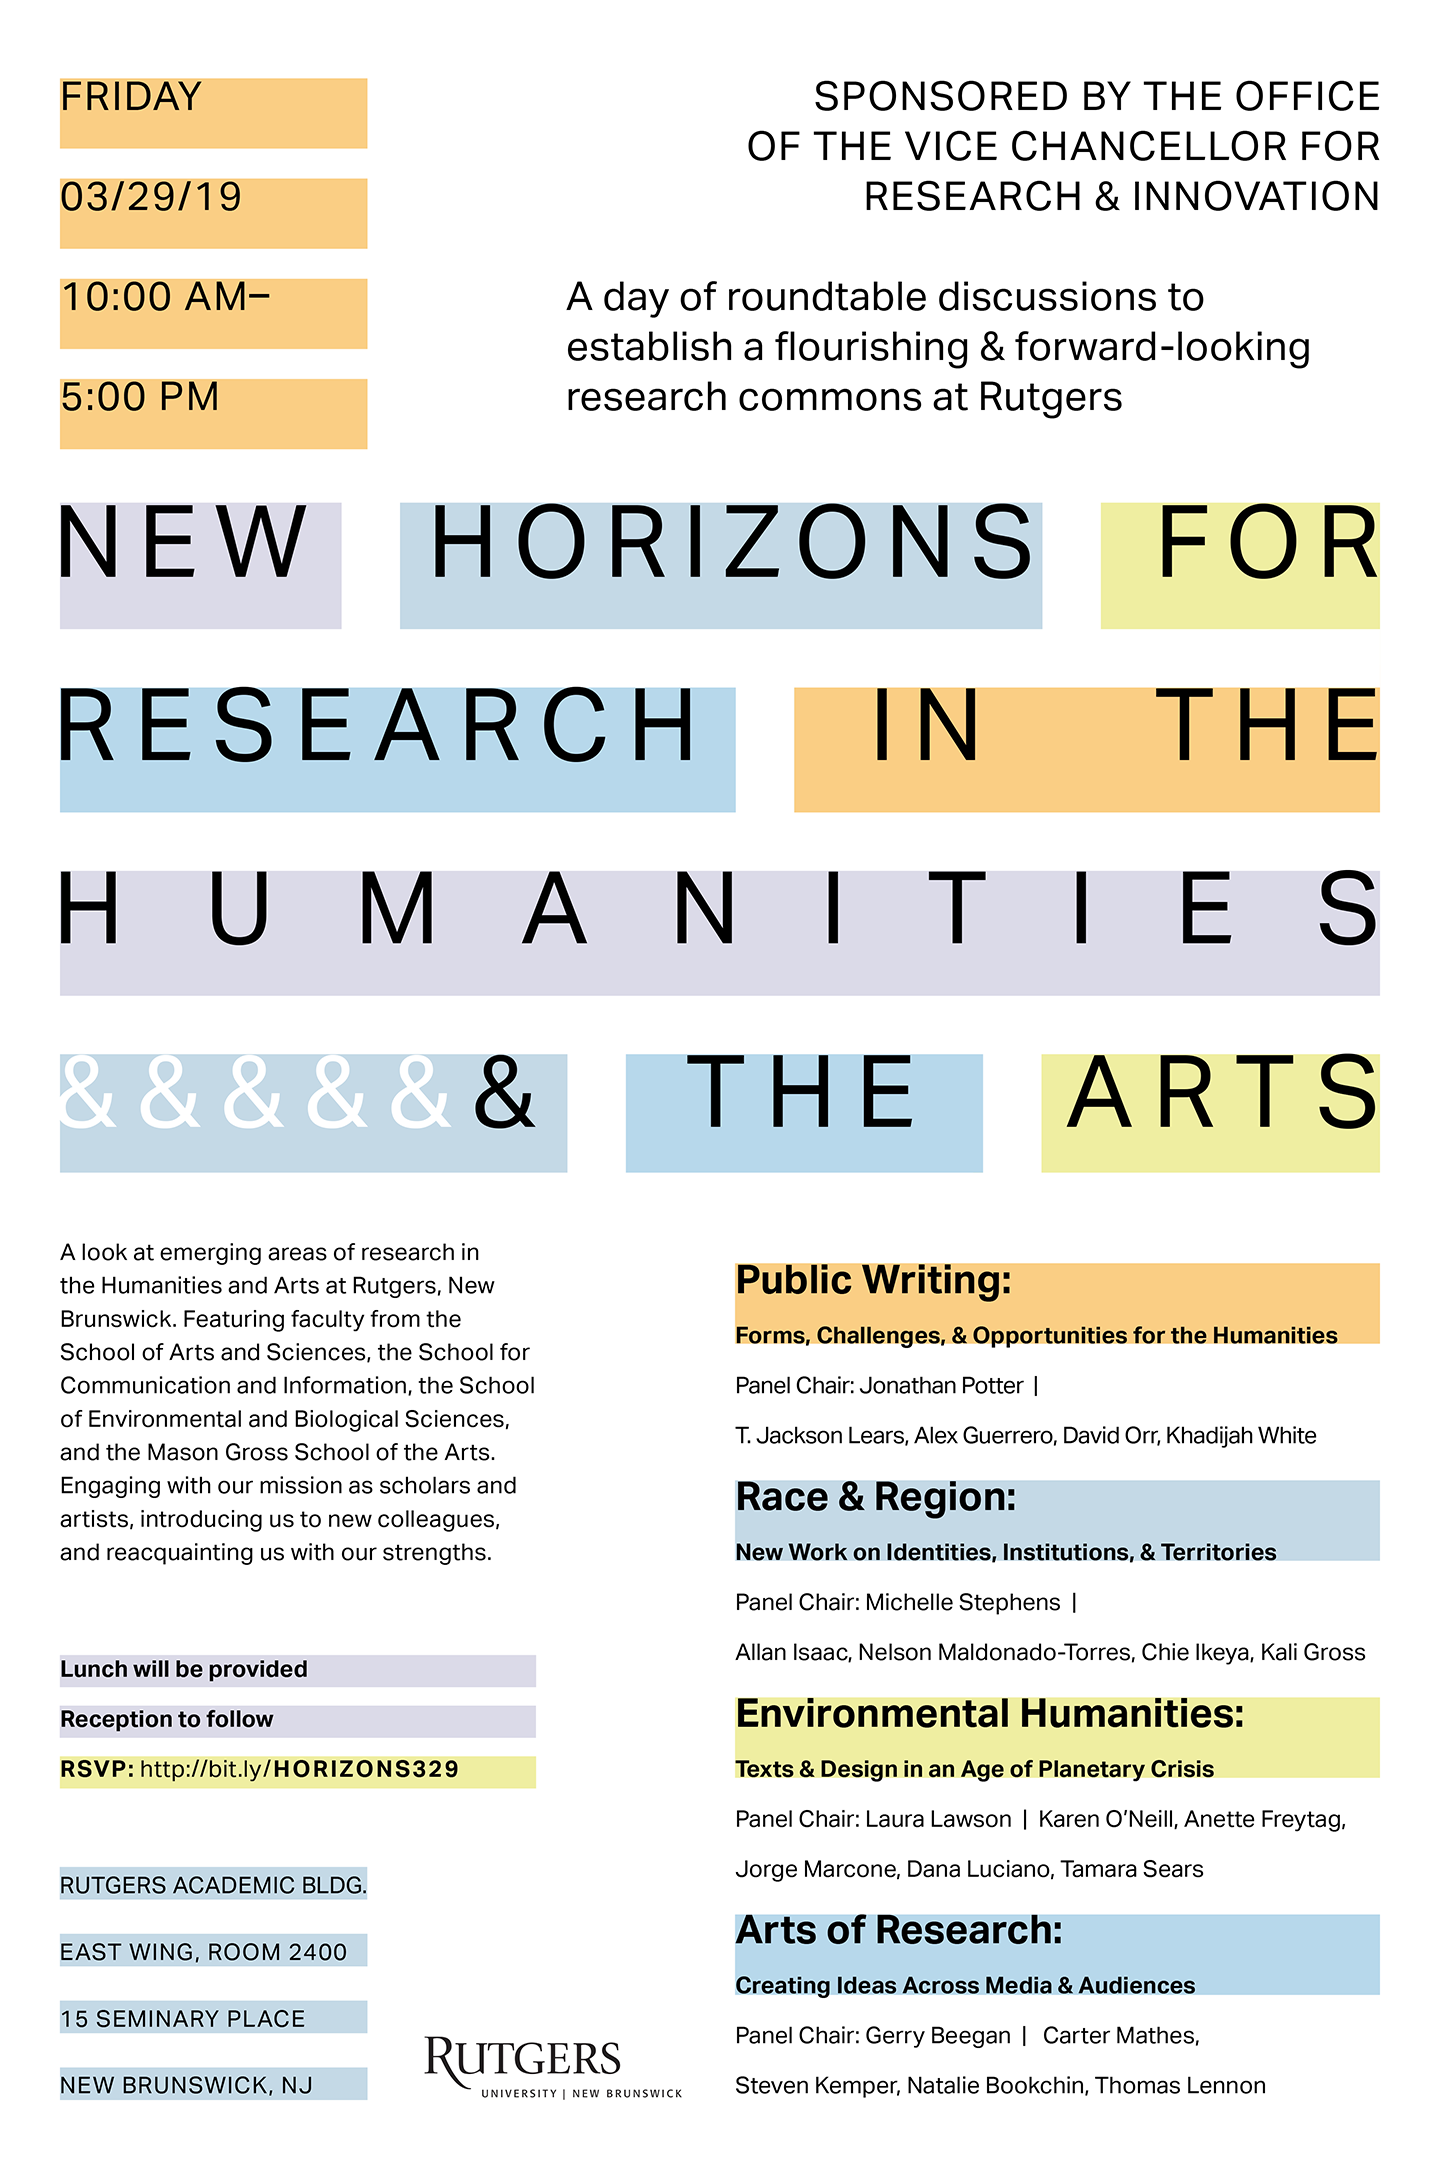 New Horizons For Research In The Humanitites And The Arts